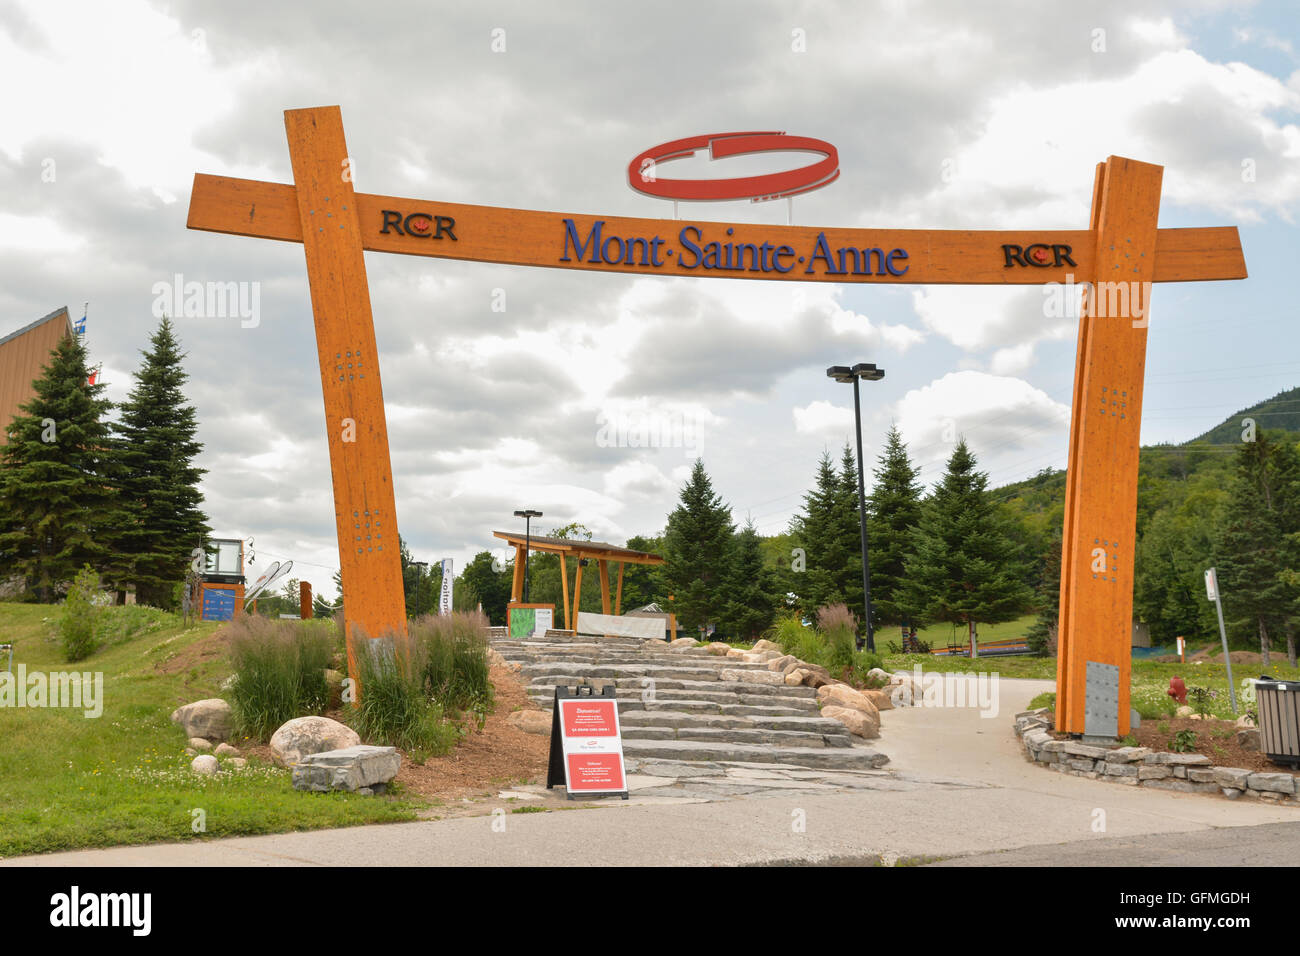 Mont-Sainte-Anne, Quebec, Canada - wooden sign at the entrance to the year round resort popular for skiing and mountain biking Stock Photo